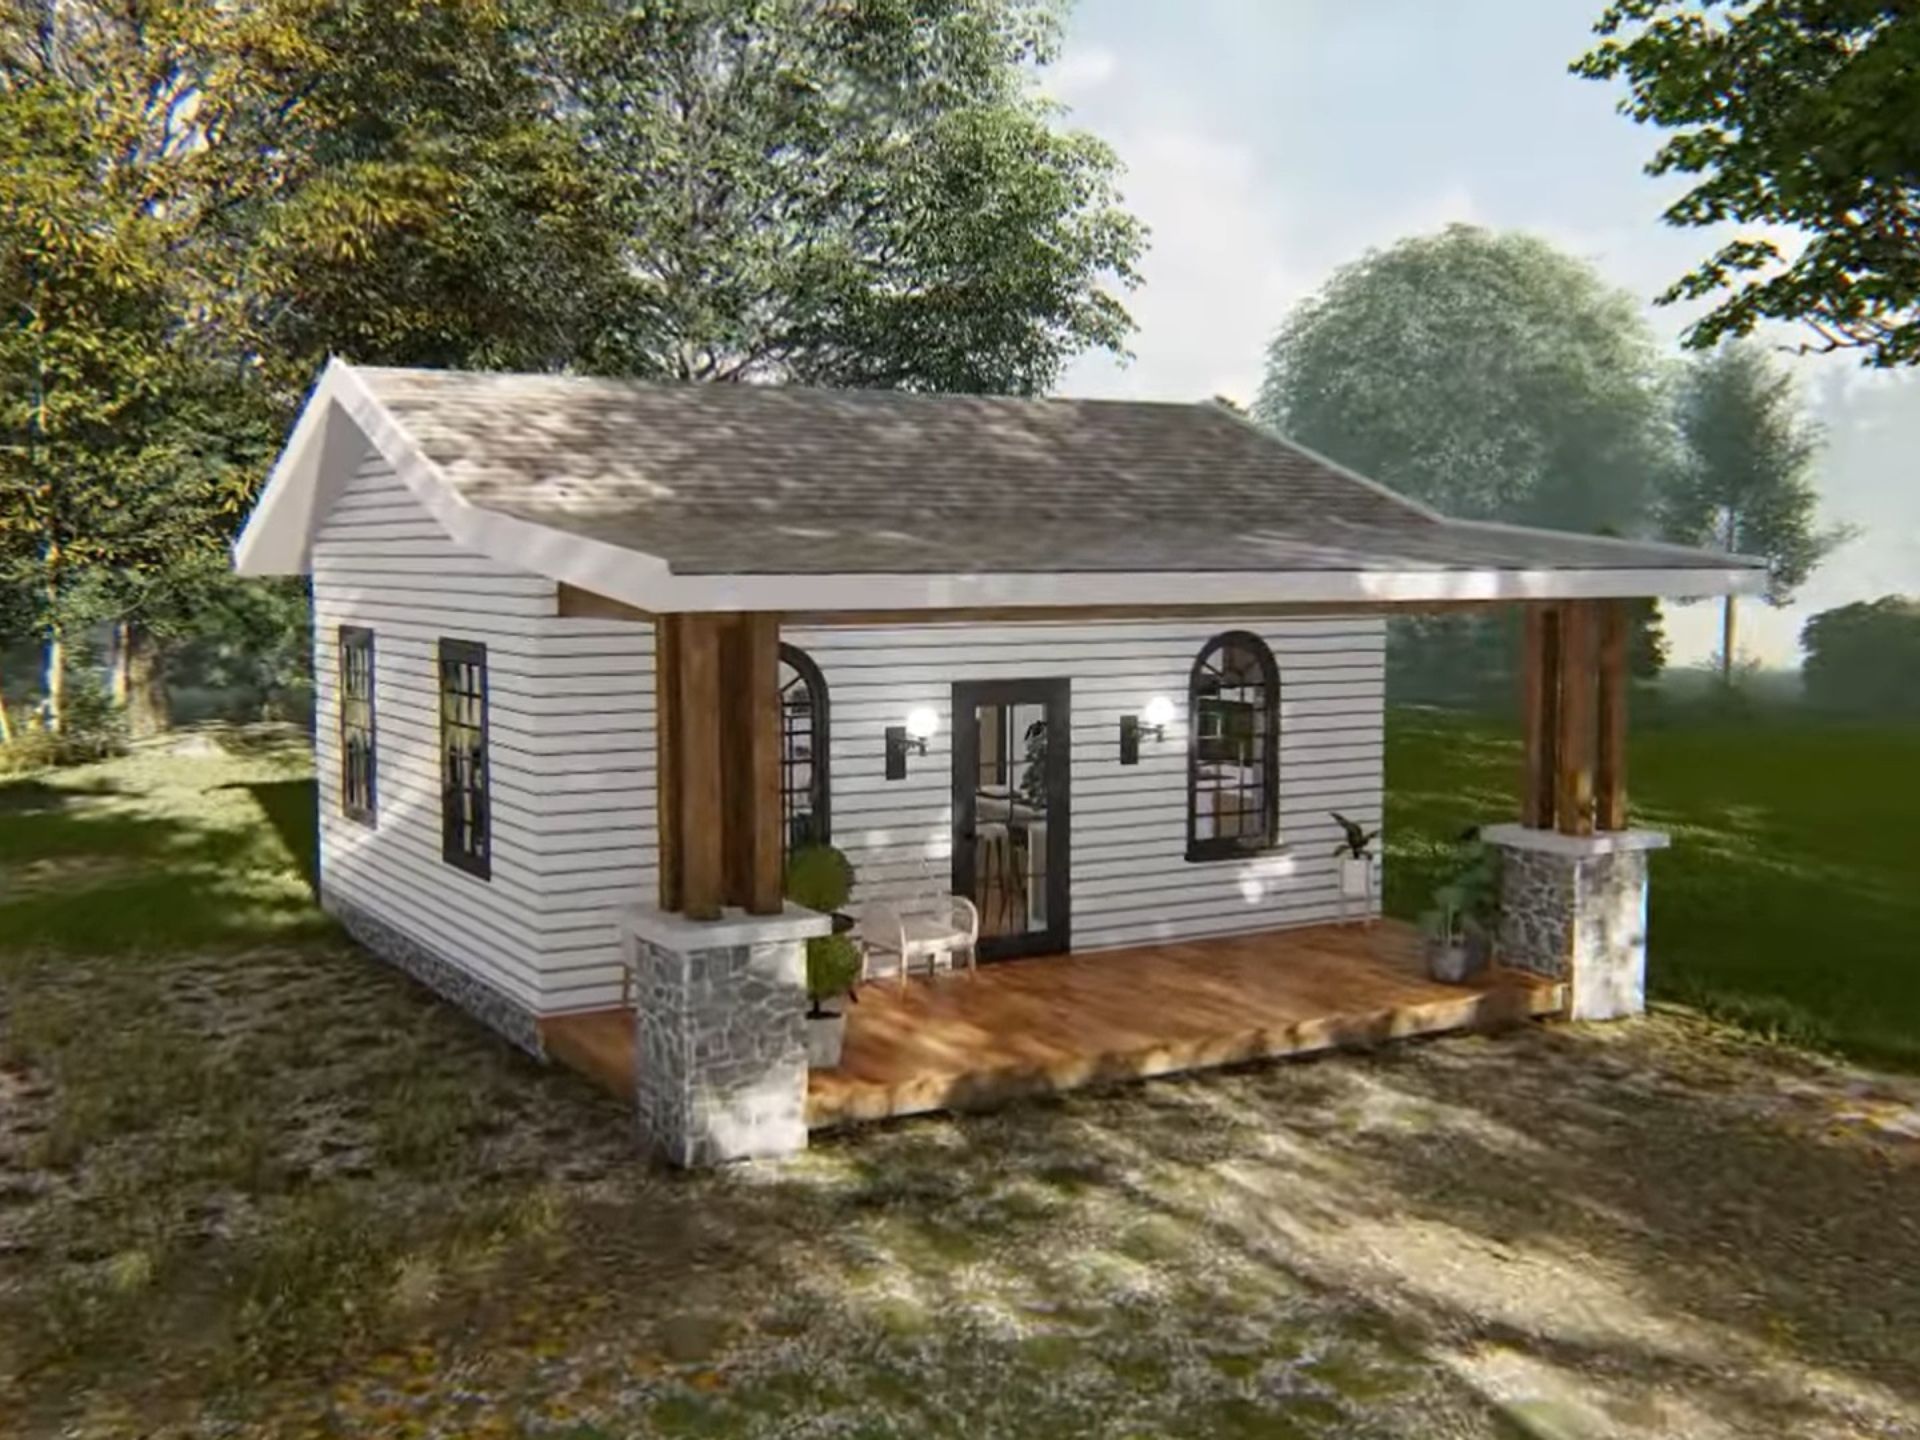 exterior of a tiny house with white walls and a porch